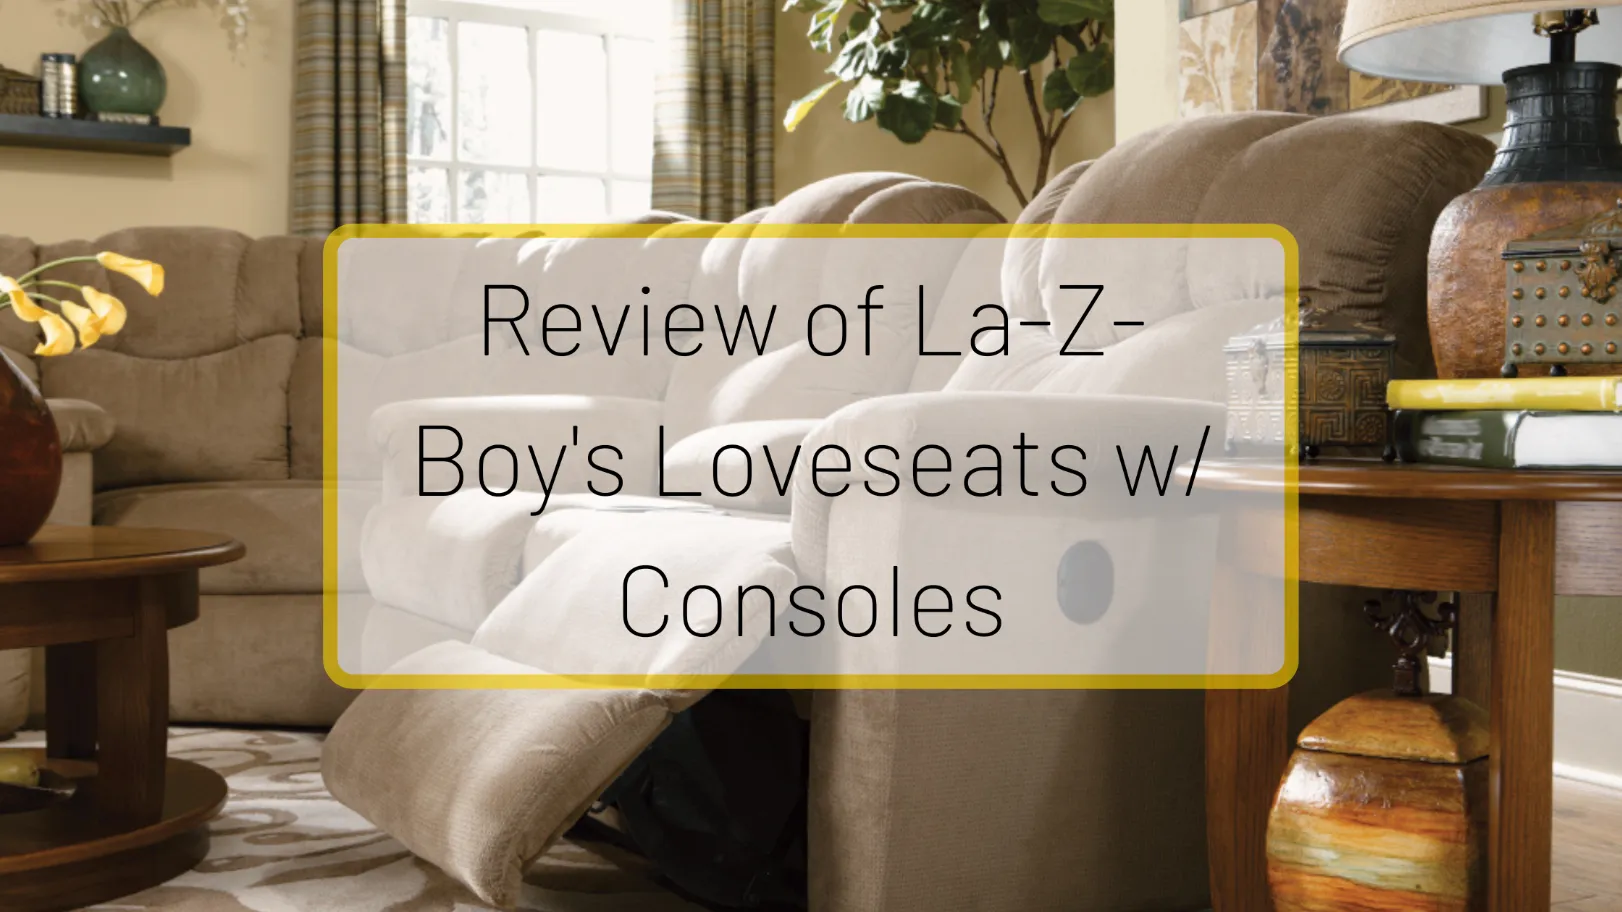 Review of La-Z-Boy's Loveseats with Consoles: Pros & Cons